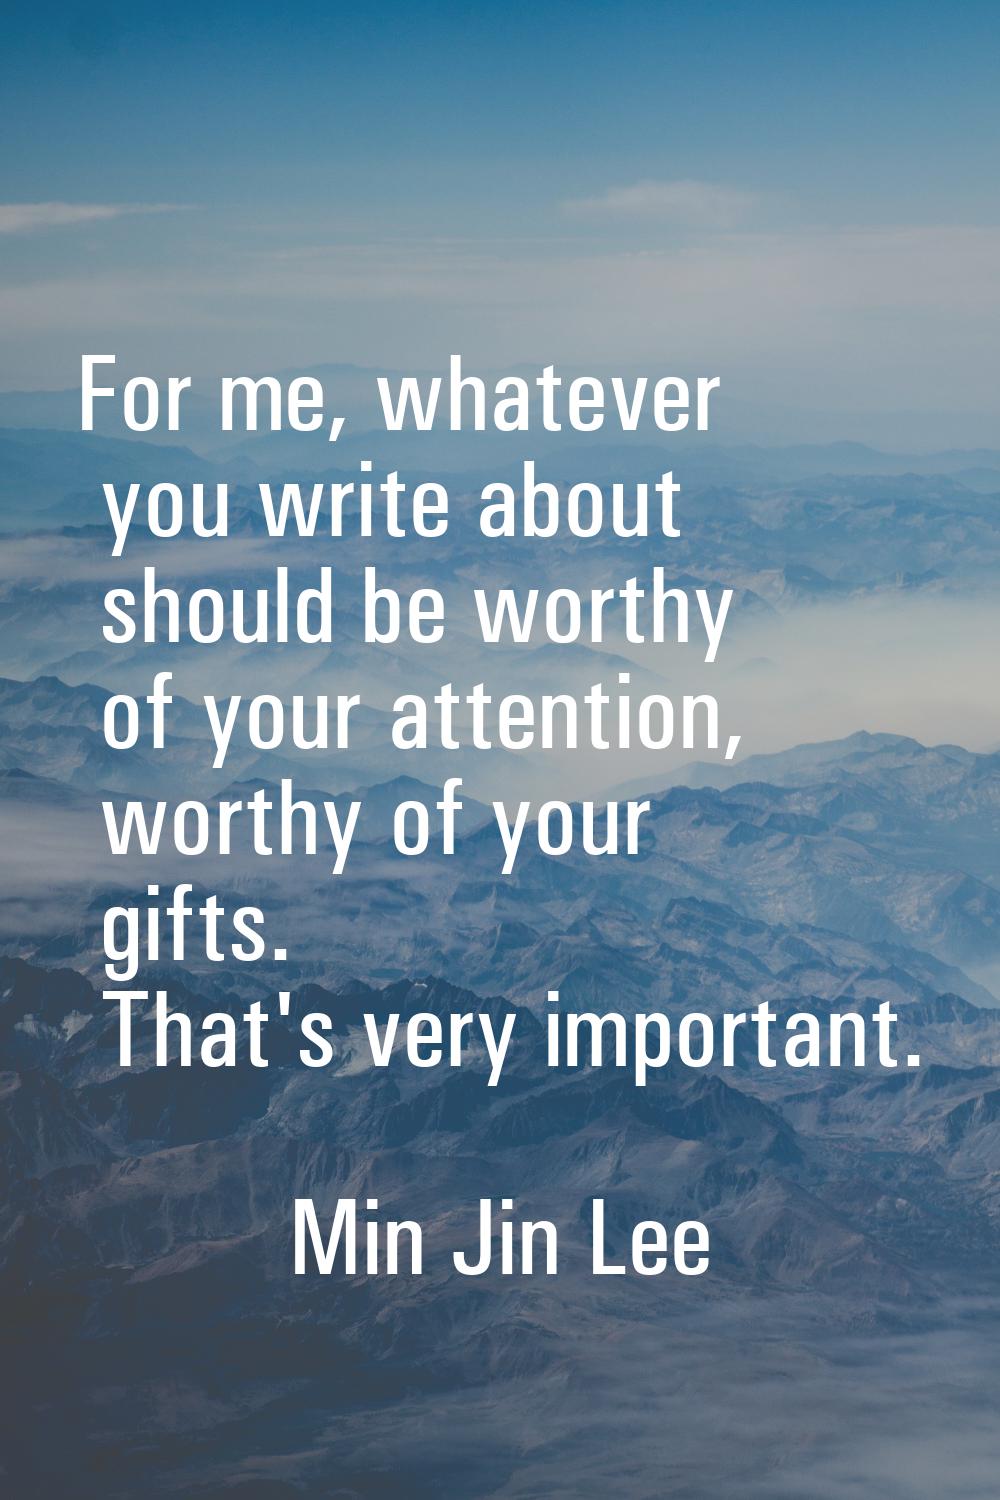 For me, whatever you write about should be worthy of your attention, worthy of your gifts. That's v